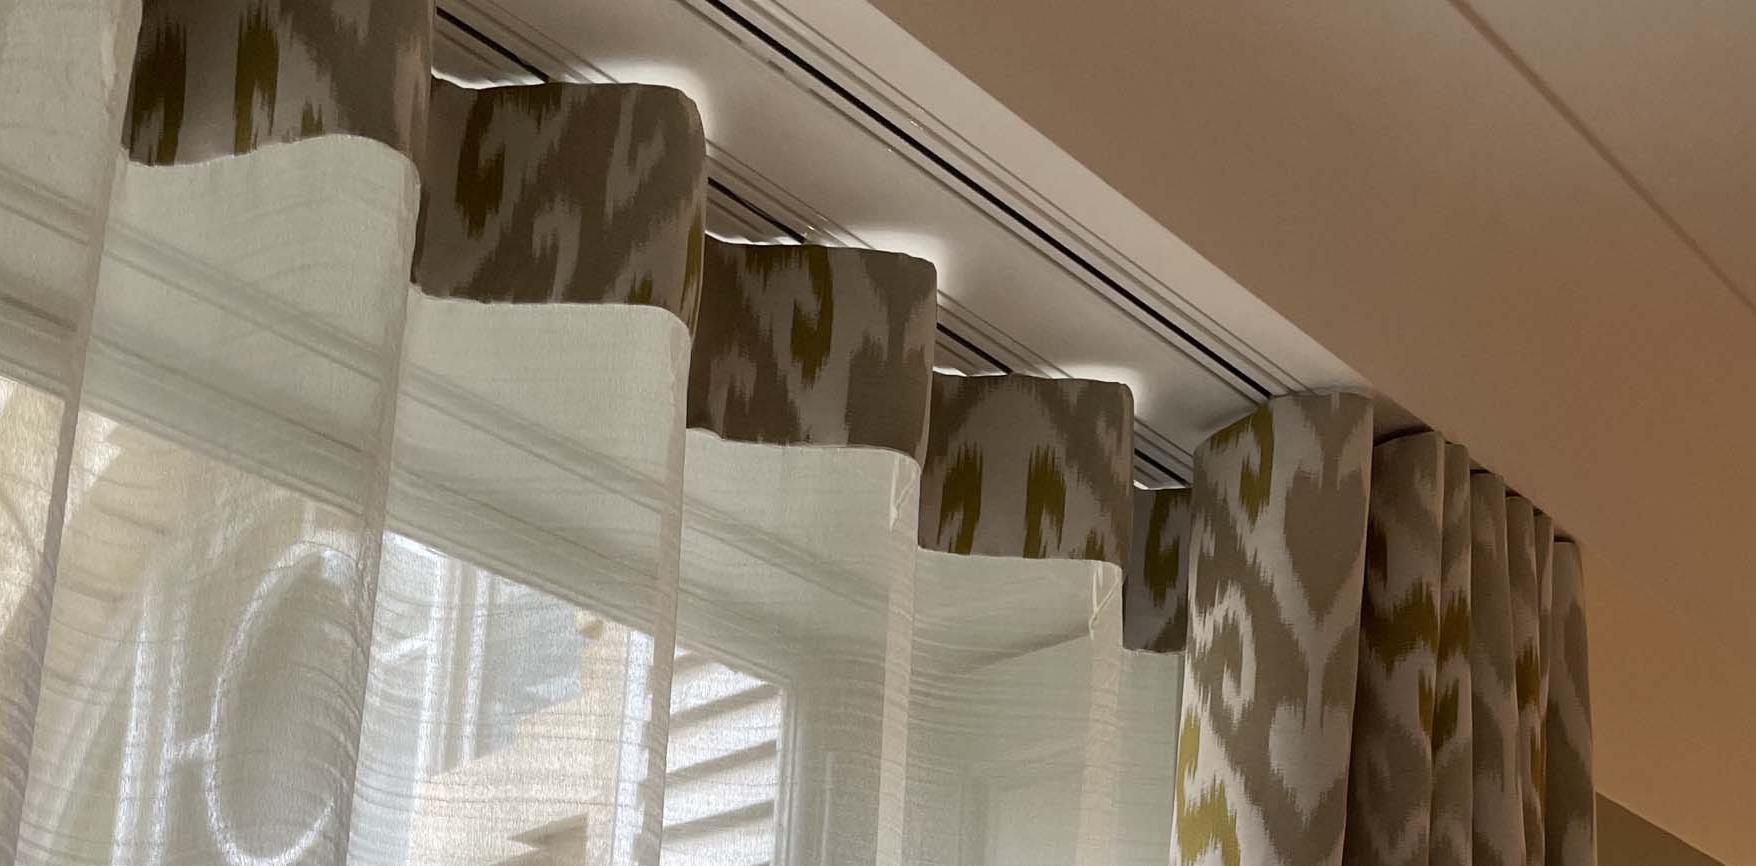 High quality realization in Wave system with this ikat fabric.